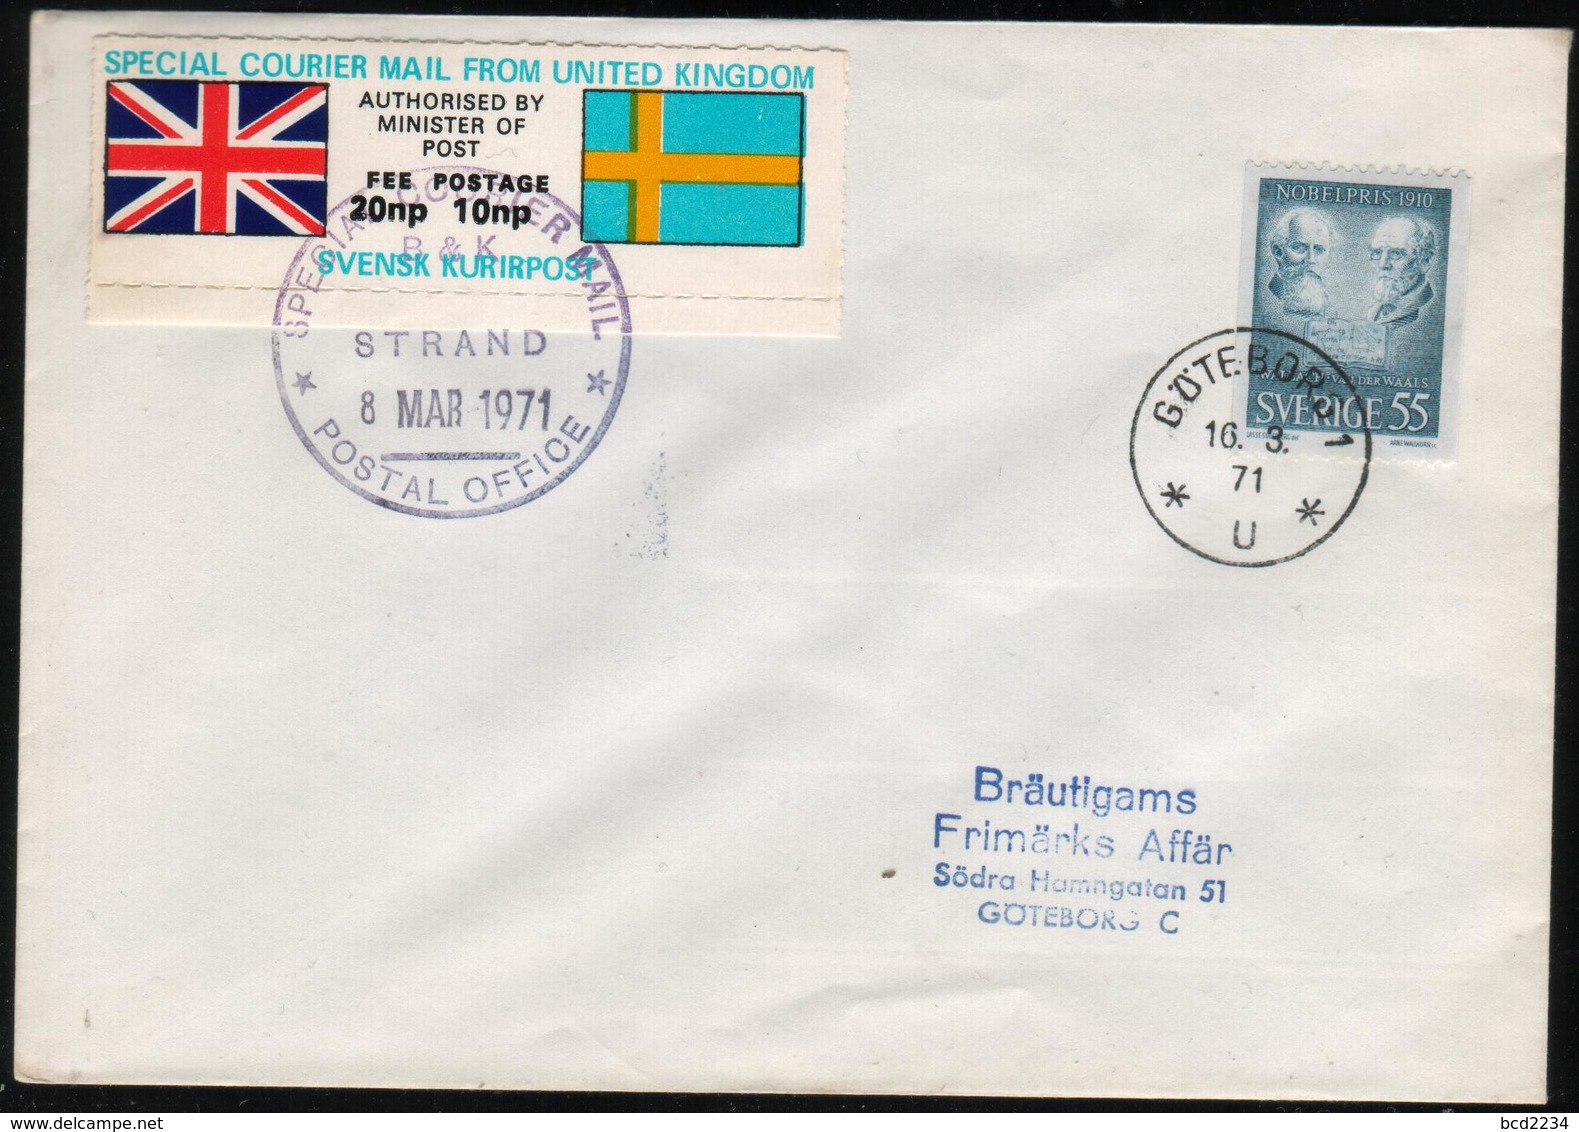 GREAT BRITAIN GB 1971 POSTAL STRIKE MAIL SPECIAL COURIER MAIL 2ND ISSUE DECIMAL COVER TO GOTEBORG SWEDEN 8 MARCH - Varietà & Curiosità